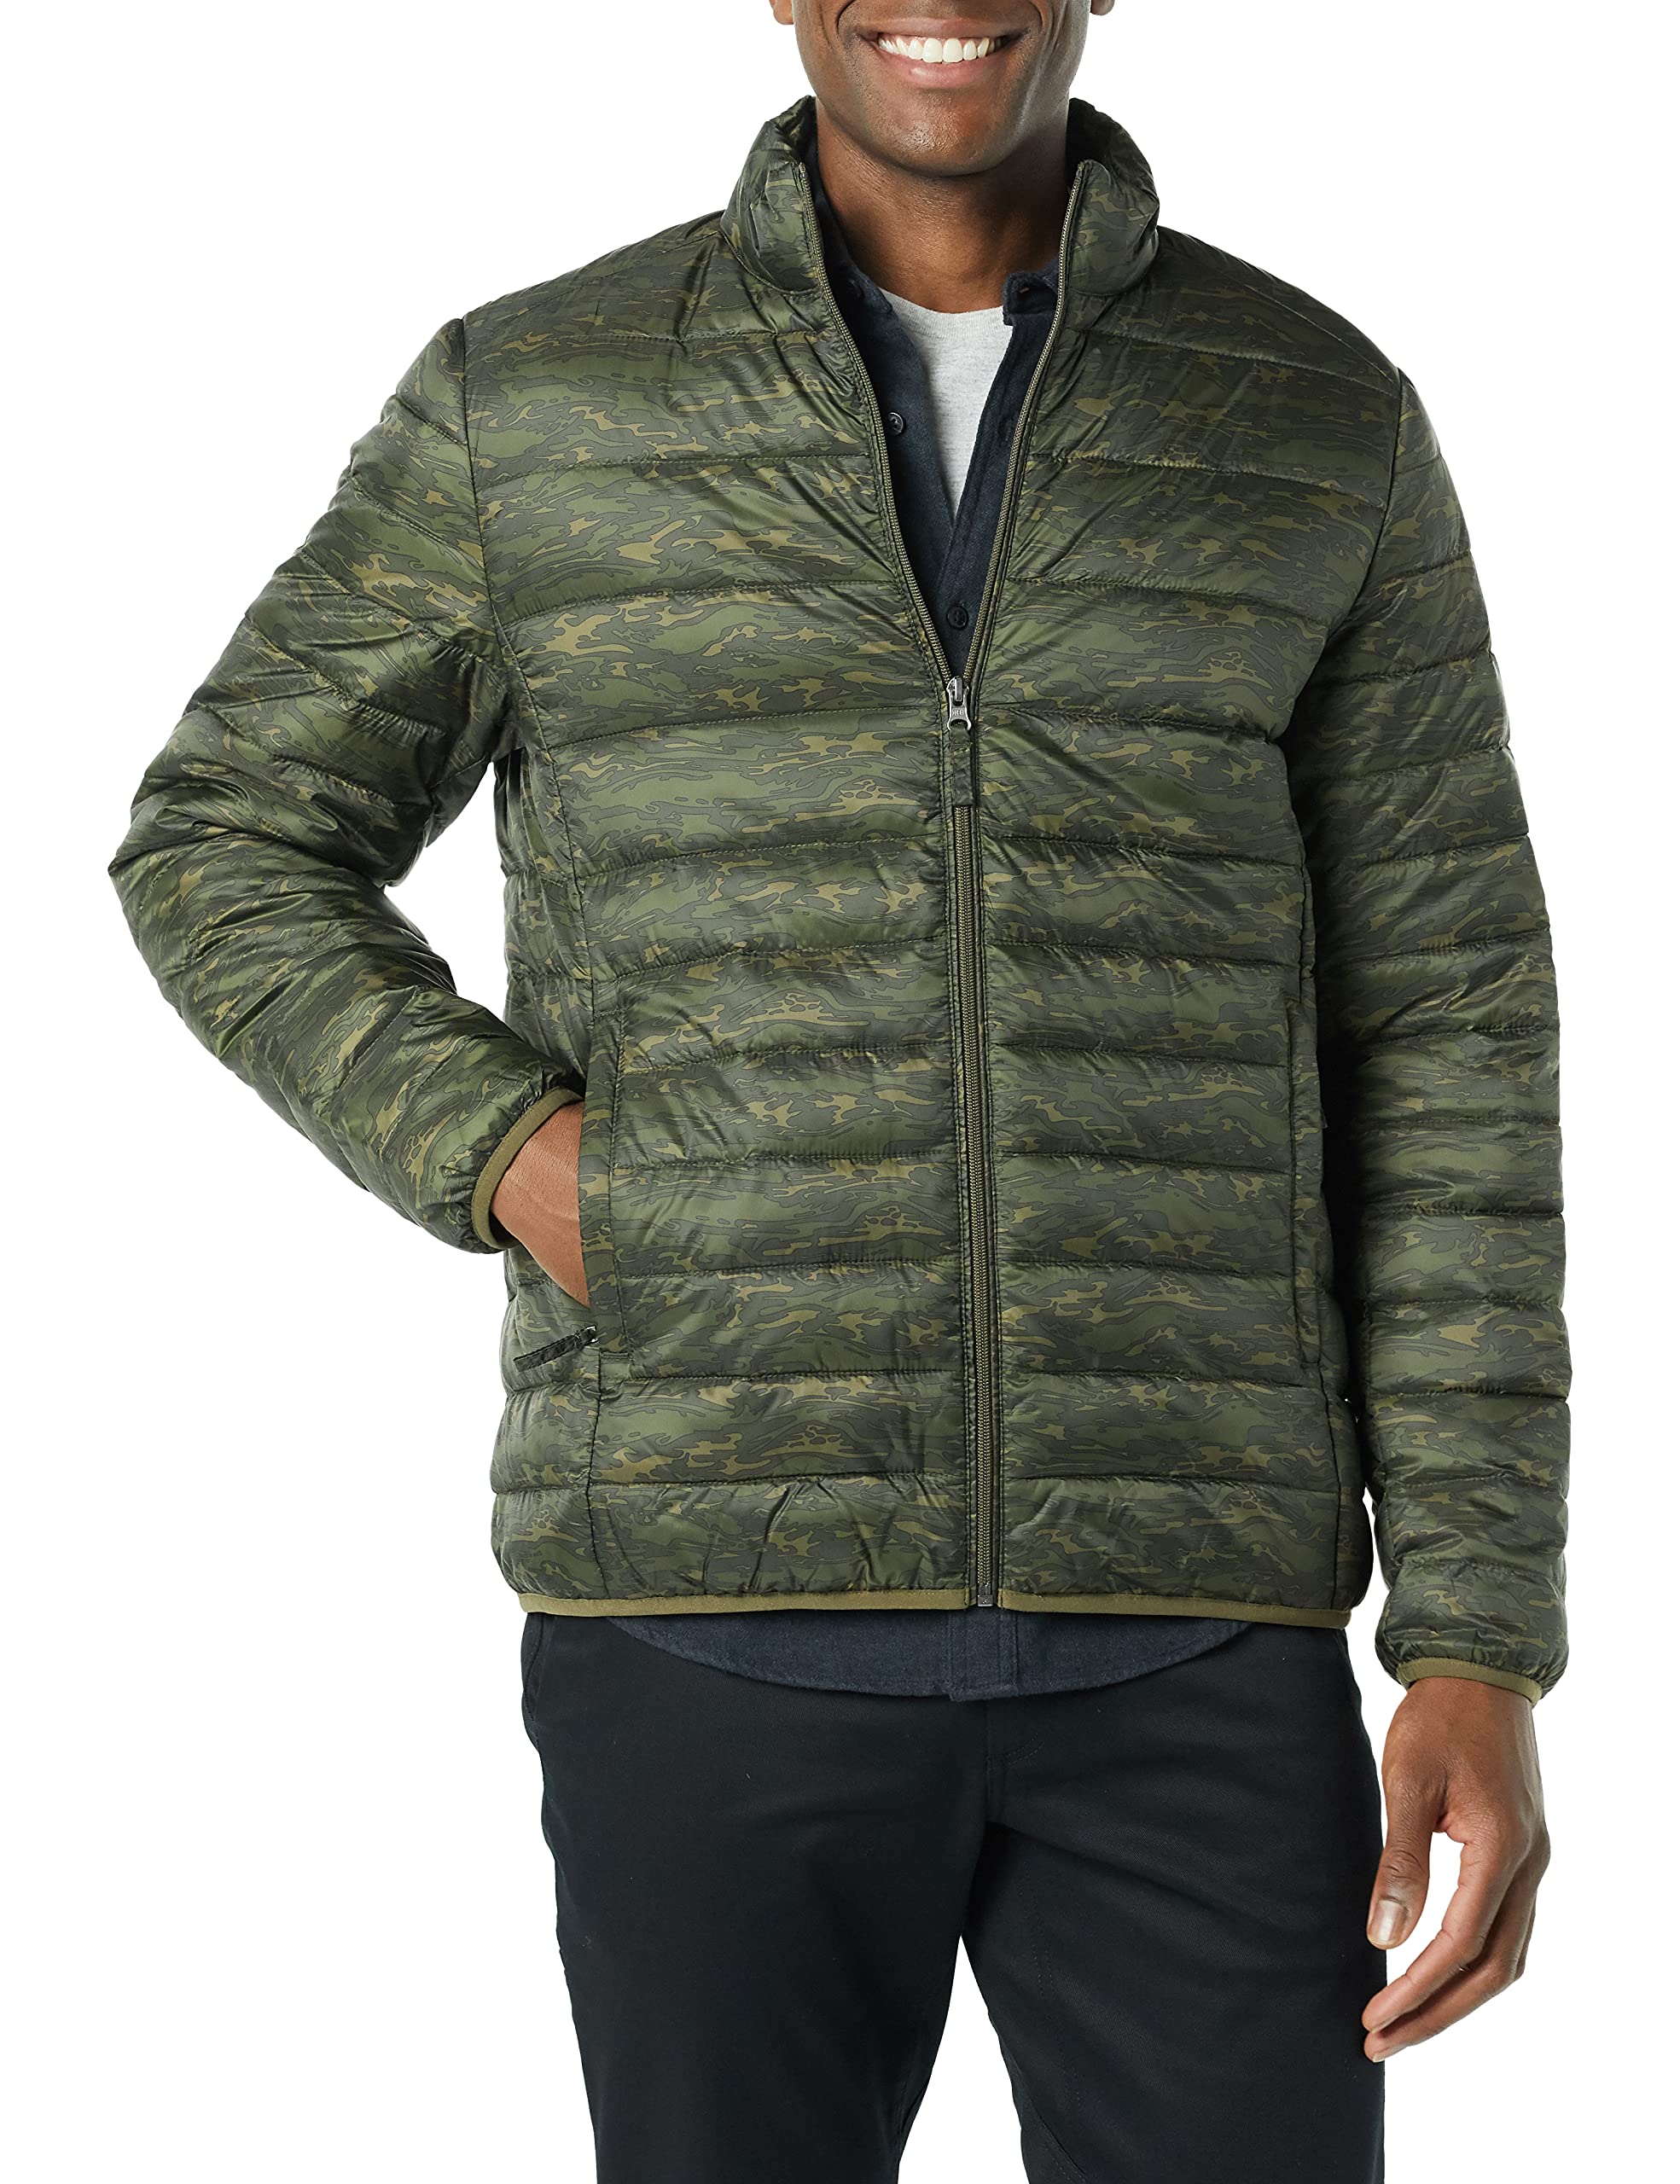 Amazon Essentials Men's Packable Lightweight Water-Resistant Puffer Jacket (Available in Big & Tall), Green Camo, X-Small